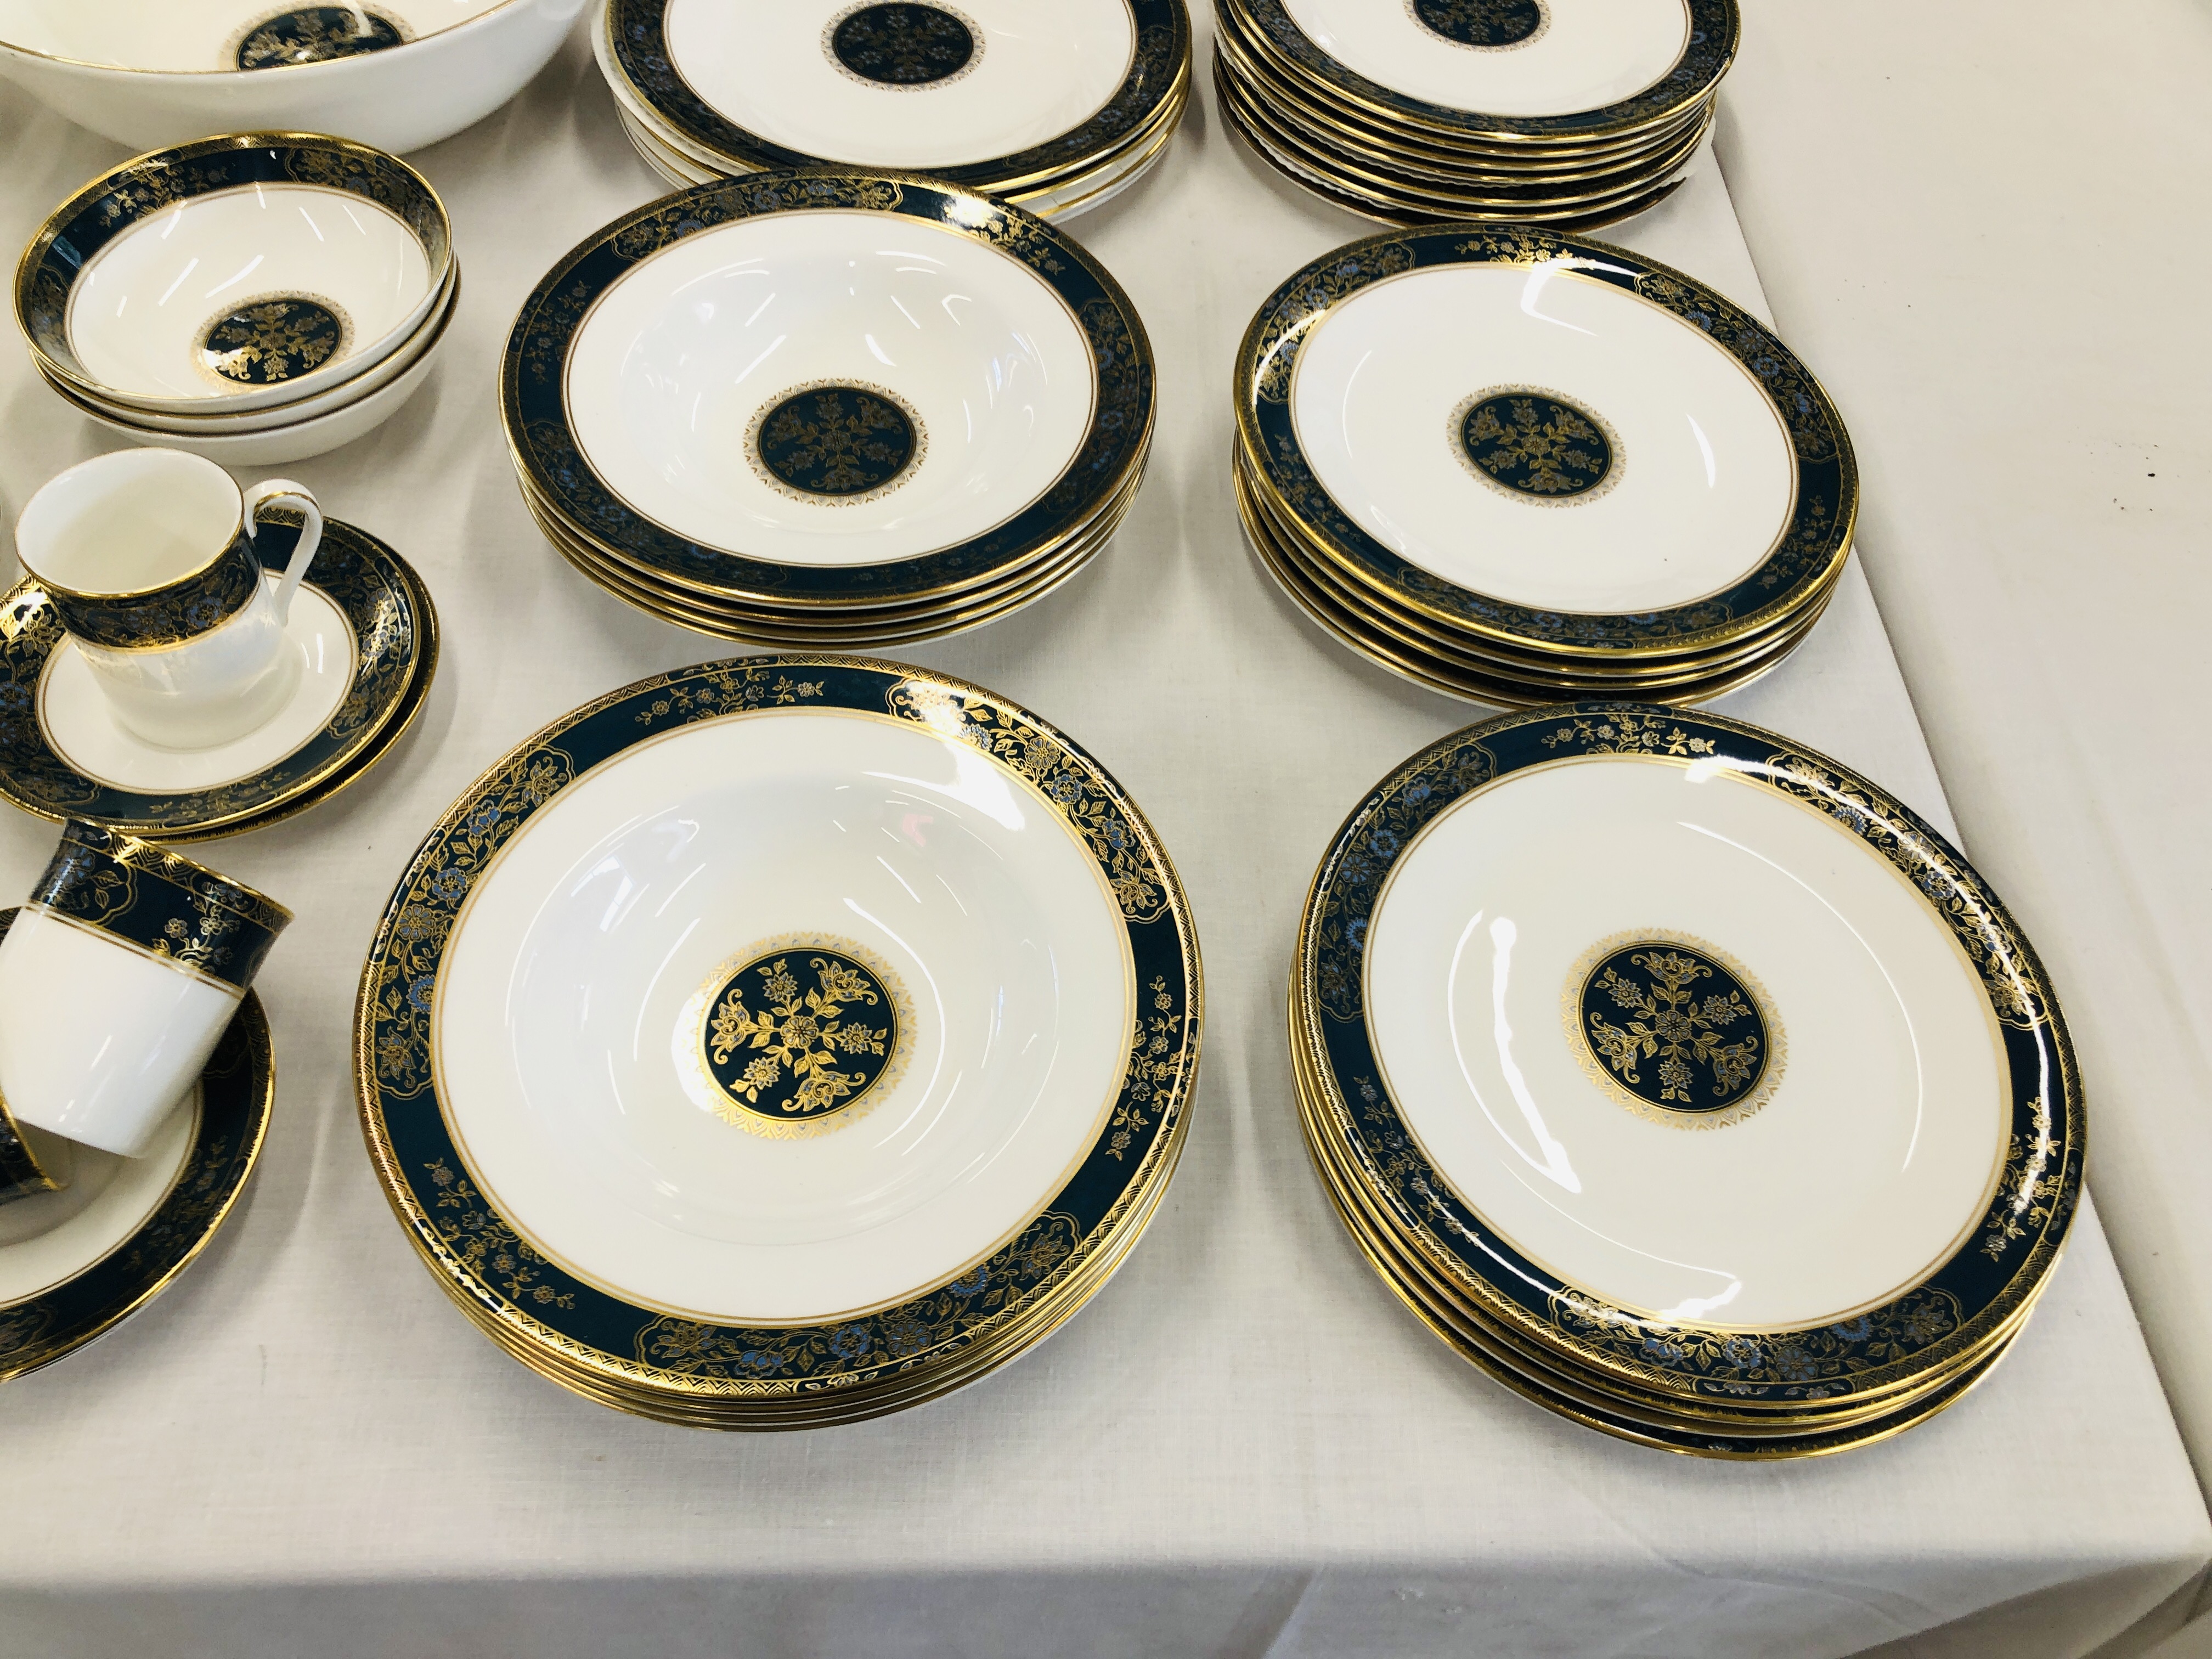 LARGE QTY OF CARLYLE H5018 ROYAL DOULTON FINE BONE CHINA TABLEWARE TO INCLUDE SOUP BOWLS, - Image 12 of 12